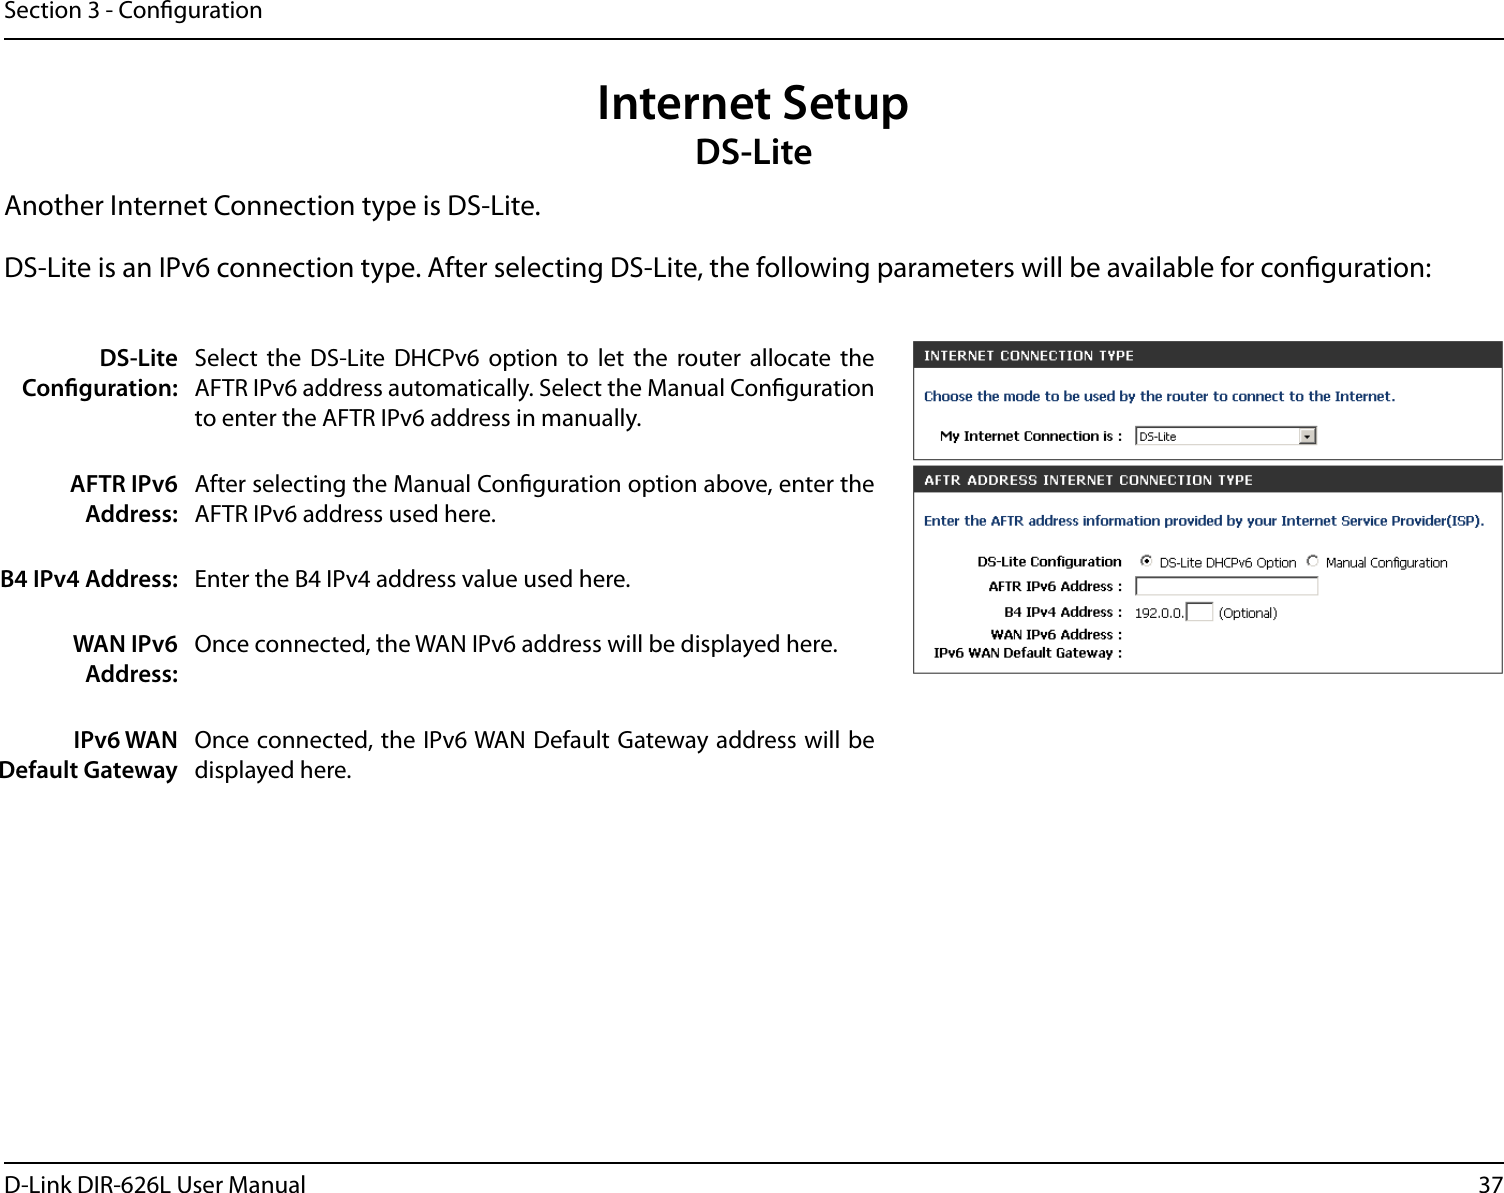 37D-Link DIR-626L User ManualSection 3 - CongurationInternet SetupDS-LiteAnother Internet Connection type is DS-Lite.DS-Lite Conguration:Select  the  DS-Lite  DHCPv6  option  to  let  the  router  allocate  the AFTR IPv6 address automatically. Select the Manual Conguration to enter the AFTR IPv6 address in manually.AFTR IPv6 Address:After selecting the Manual Conguration option above, enter the AFTR IPv6 address used here.B4 IPv4 Address: Enter the B4 IPv4 address value used here.WAN IPv6 Address:Once connected, the WAN IPv6 address will be displayed here.IPv6 WAN Default GatewayOnce connected, the IPv6 WAN Default Gateway address will be displayed here.DS-Lite is an IPv6 connection type. After selecting DS-Lite, the following parameters will be available for conguration: